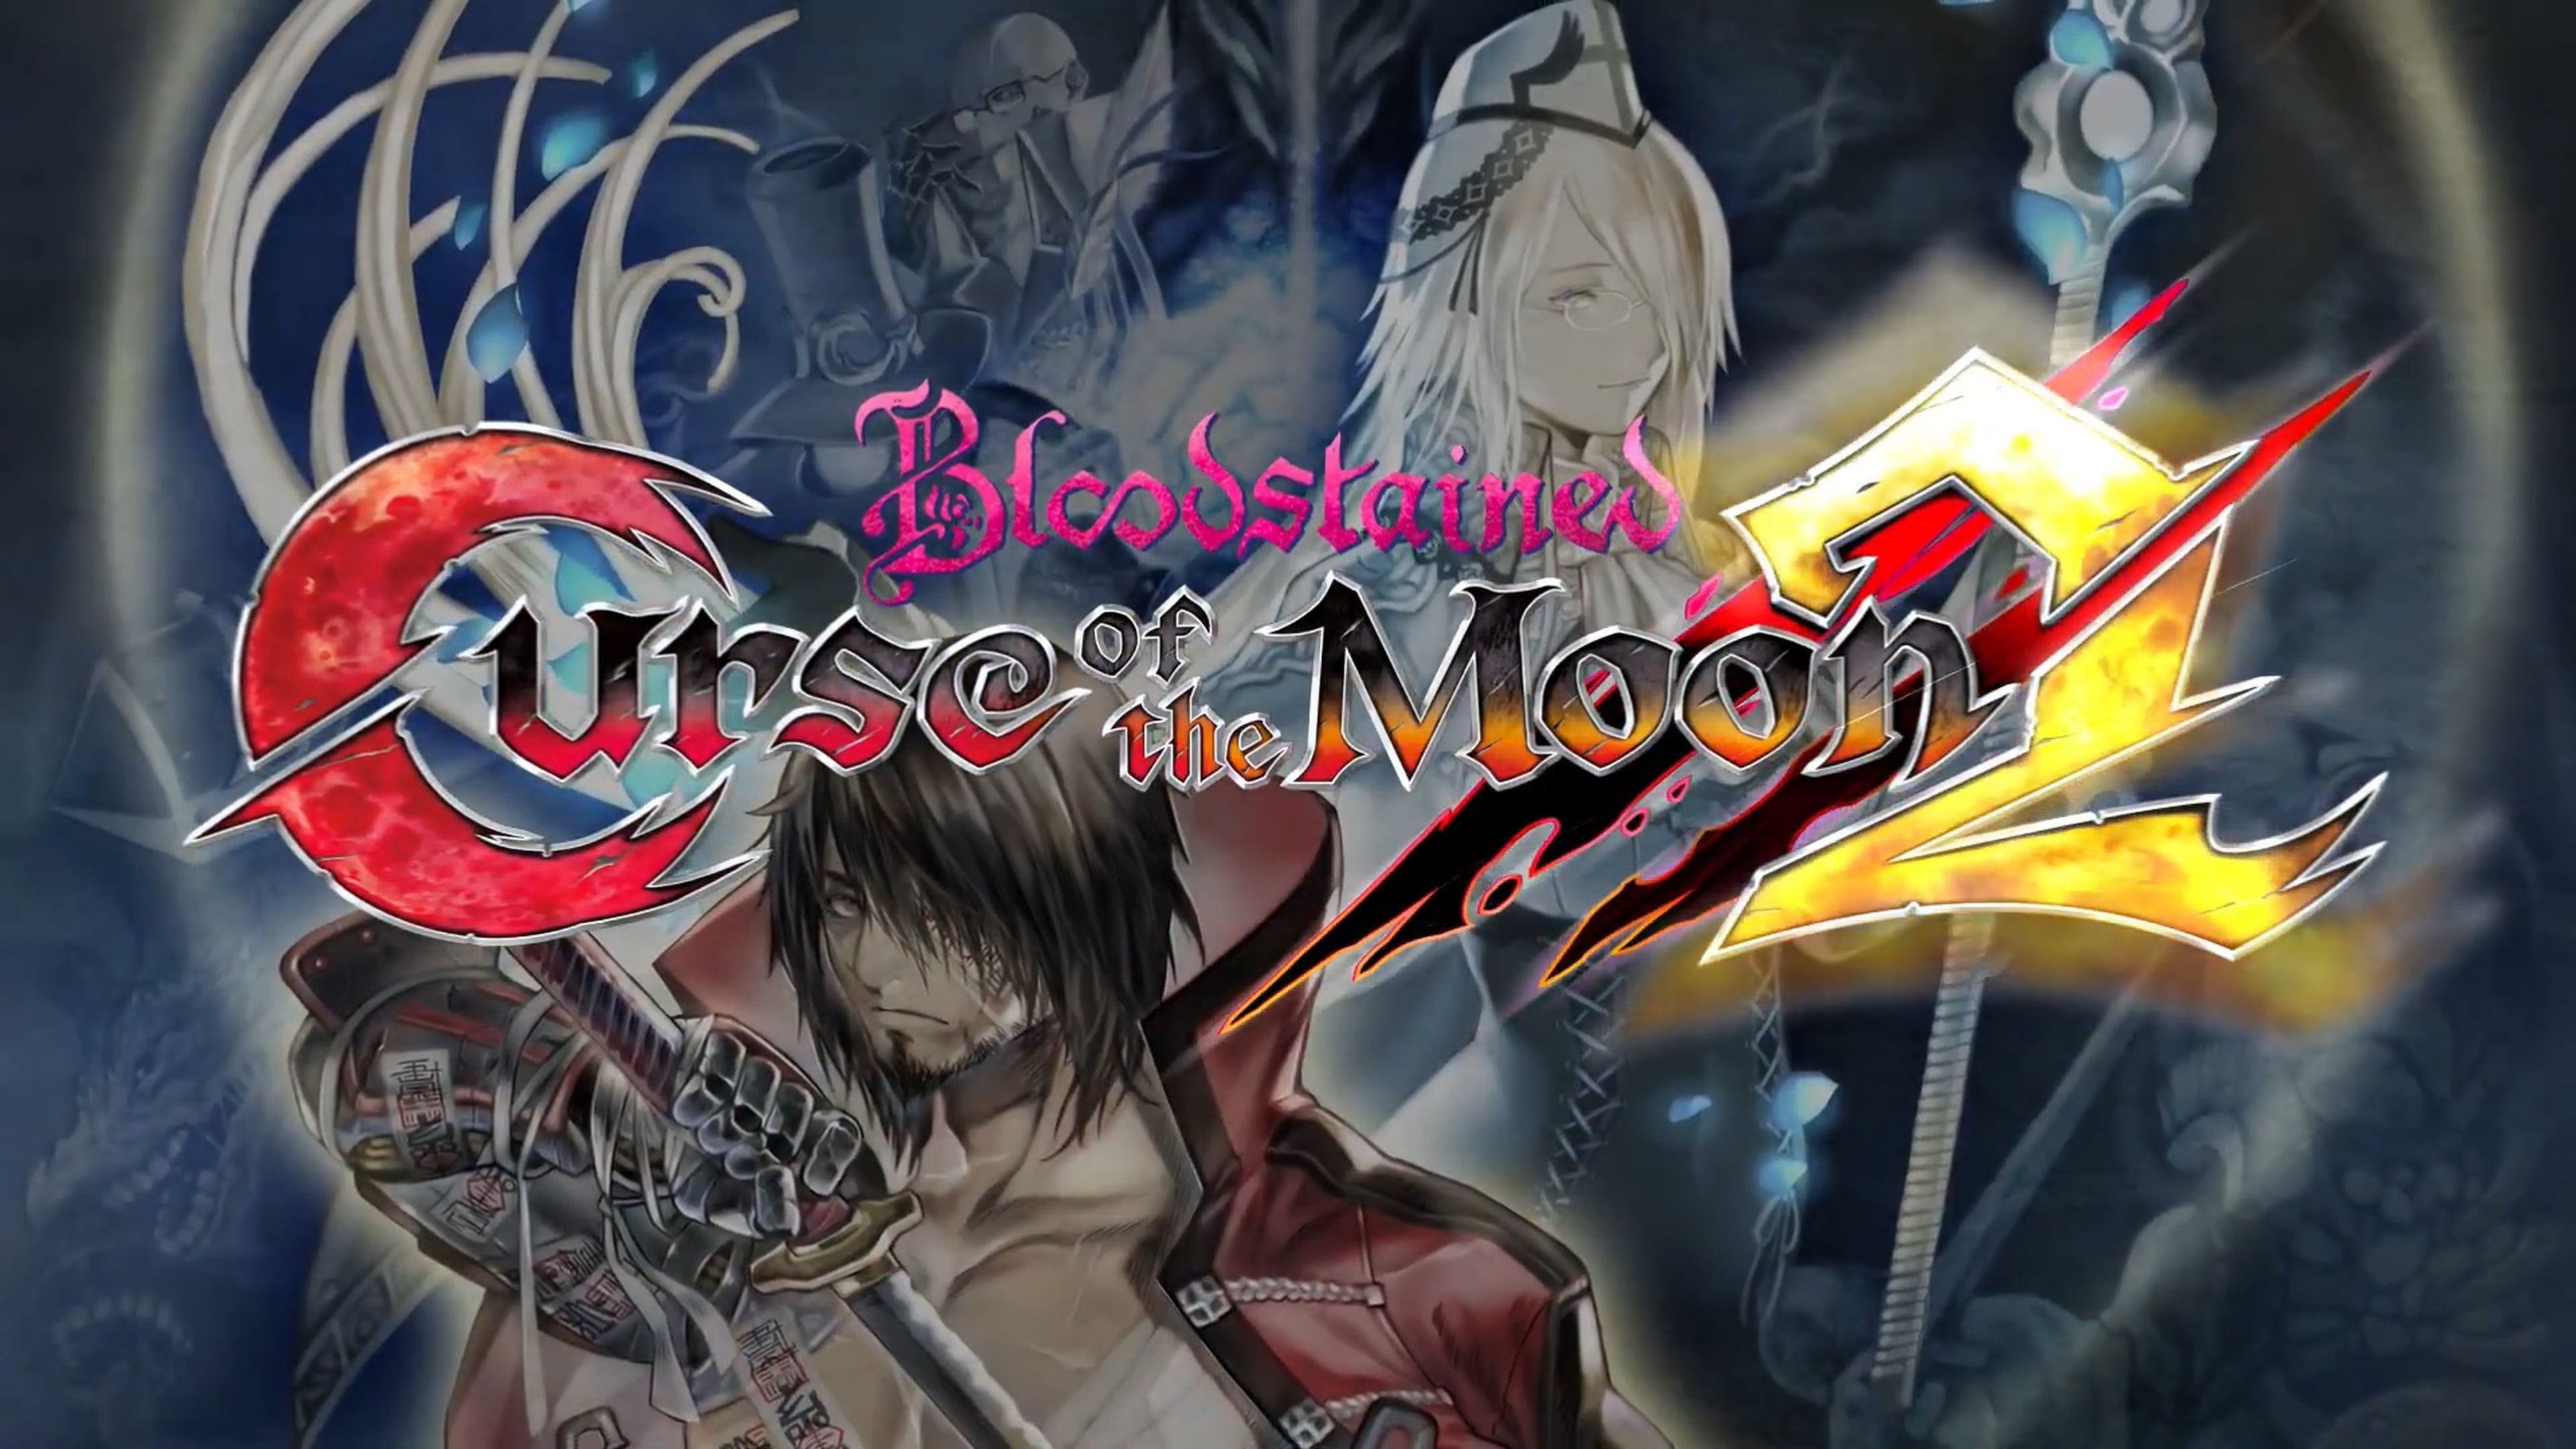 Return play. Bloodstained Curse of the Moon 2. Bloodstained Curse of the Moon 2 Arts. Bloodstained проклятие Луны. Мириам Bloodstained.